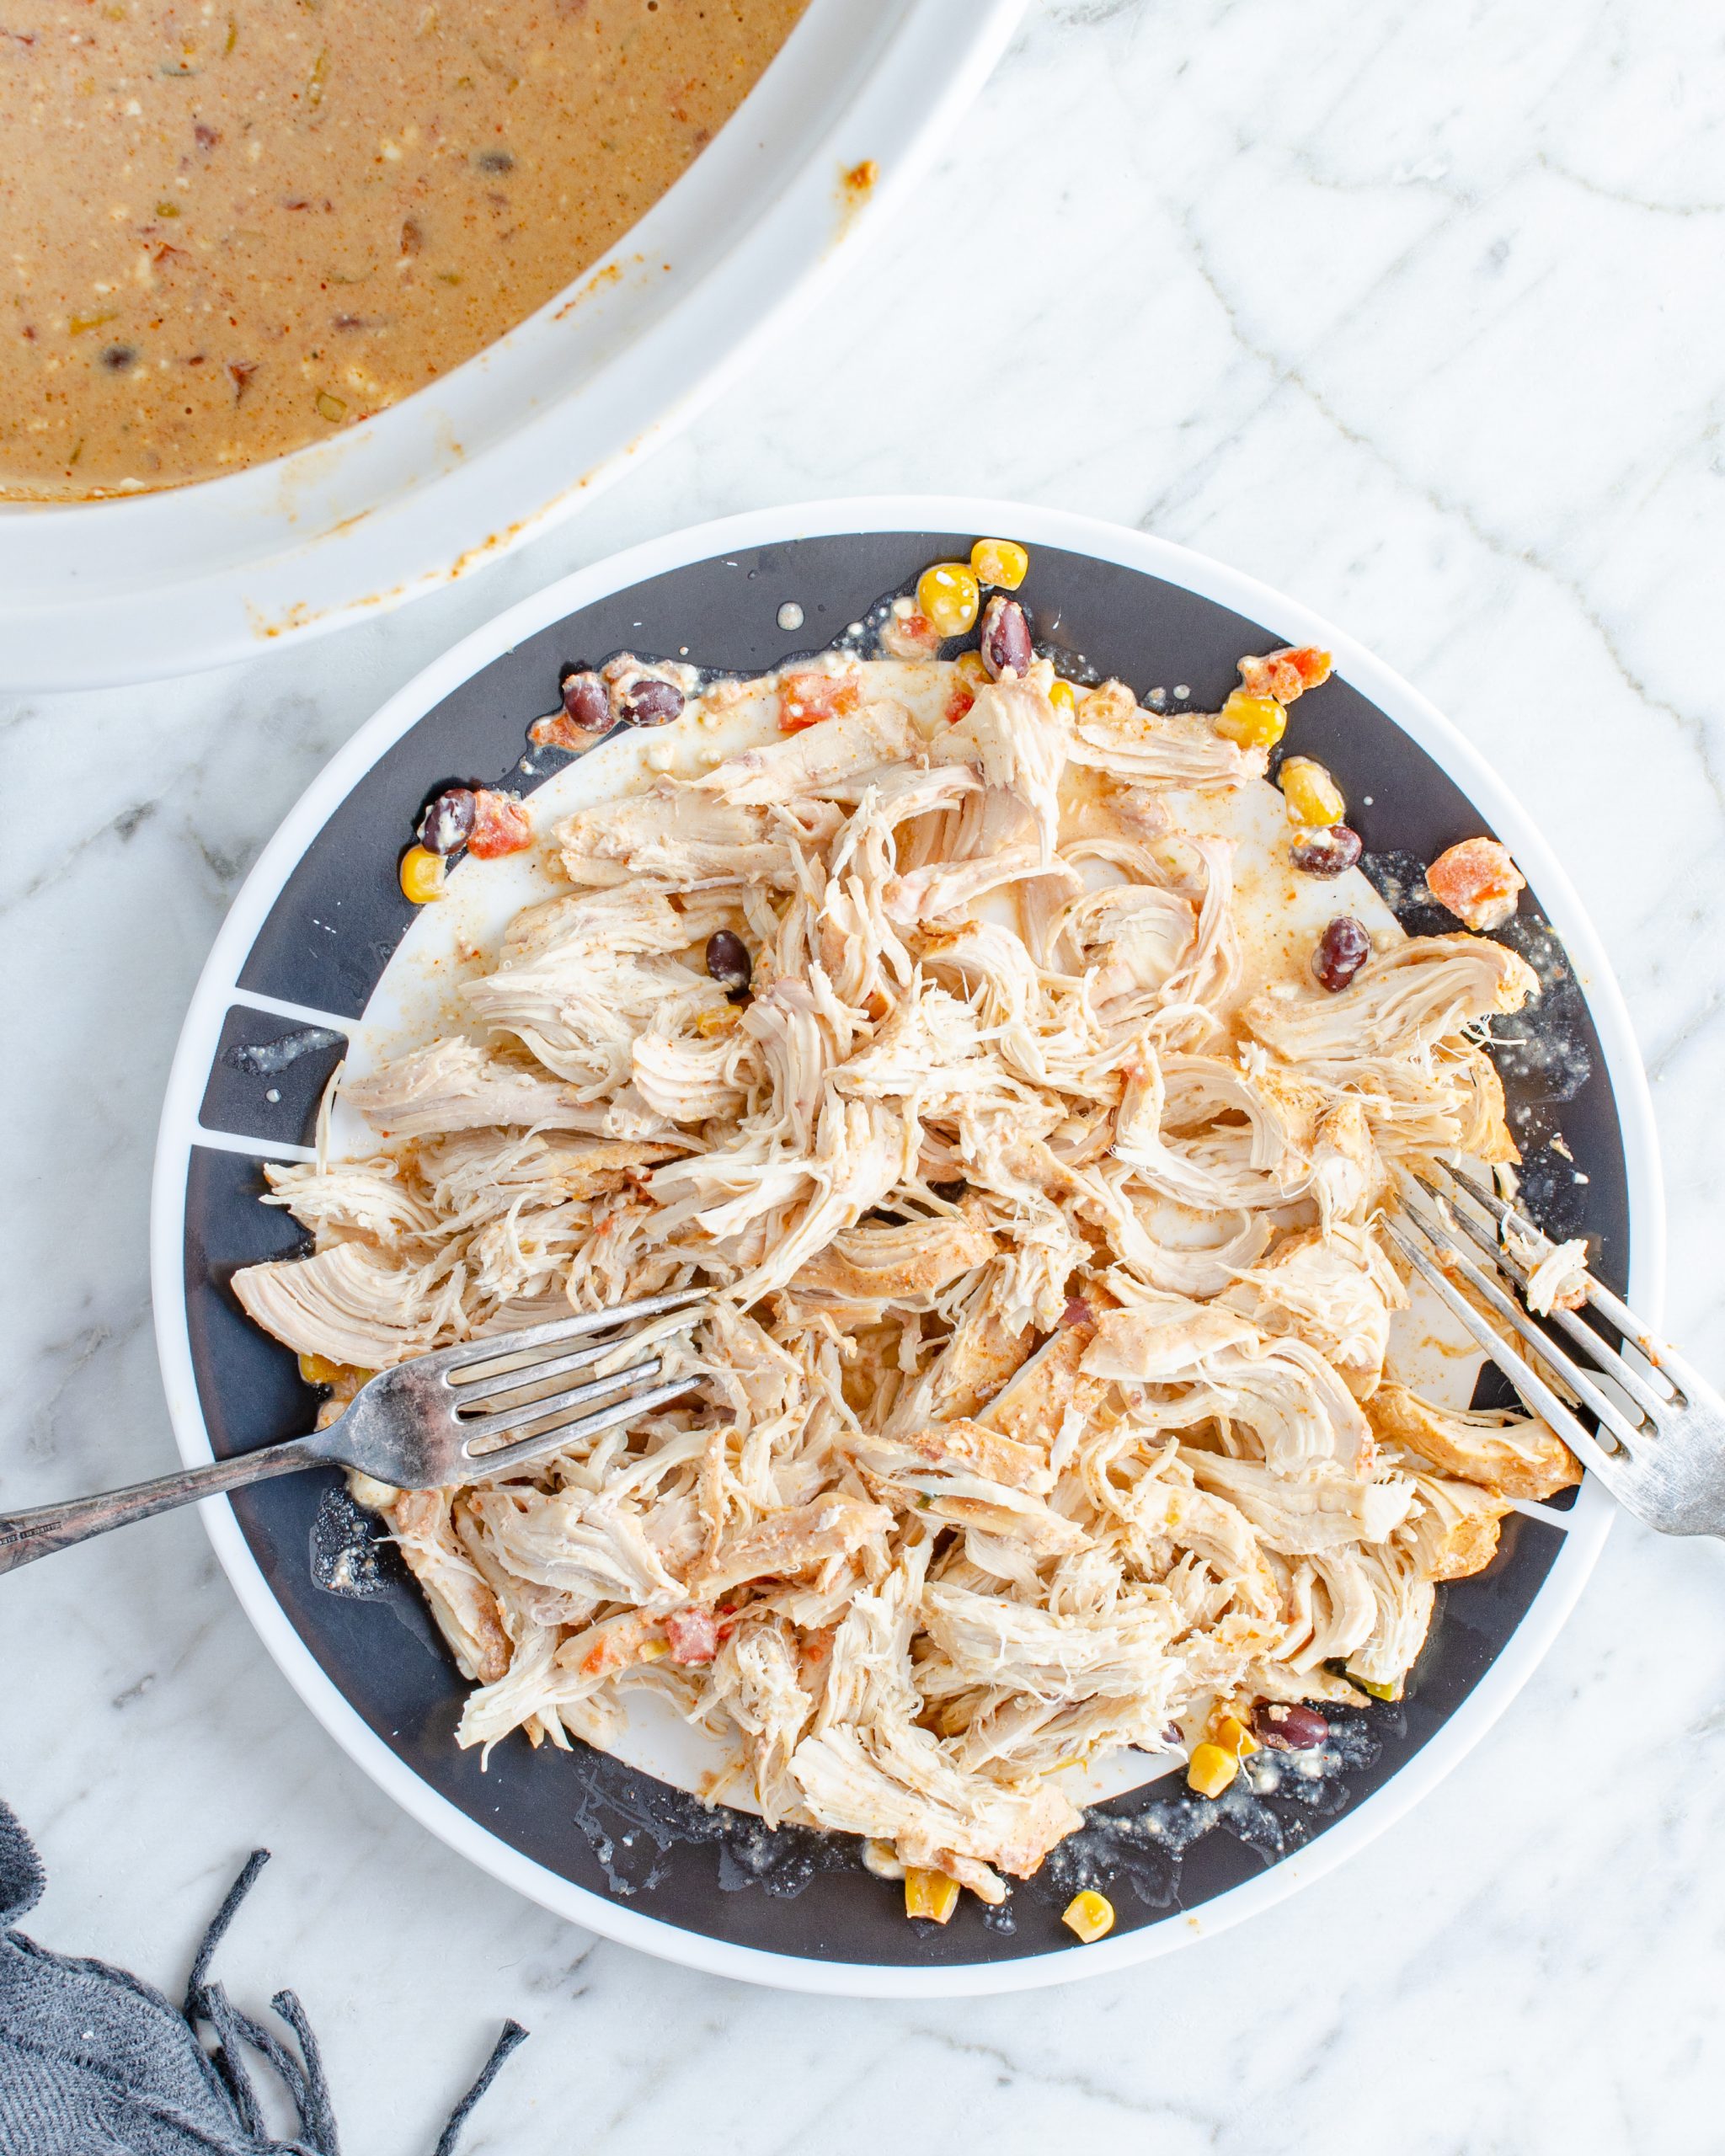 shred the chicken with two forks, and stir the contents to combine and mix well. 